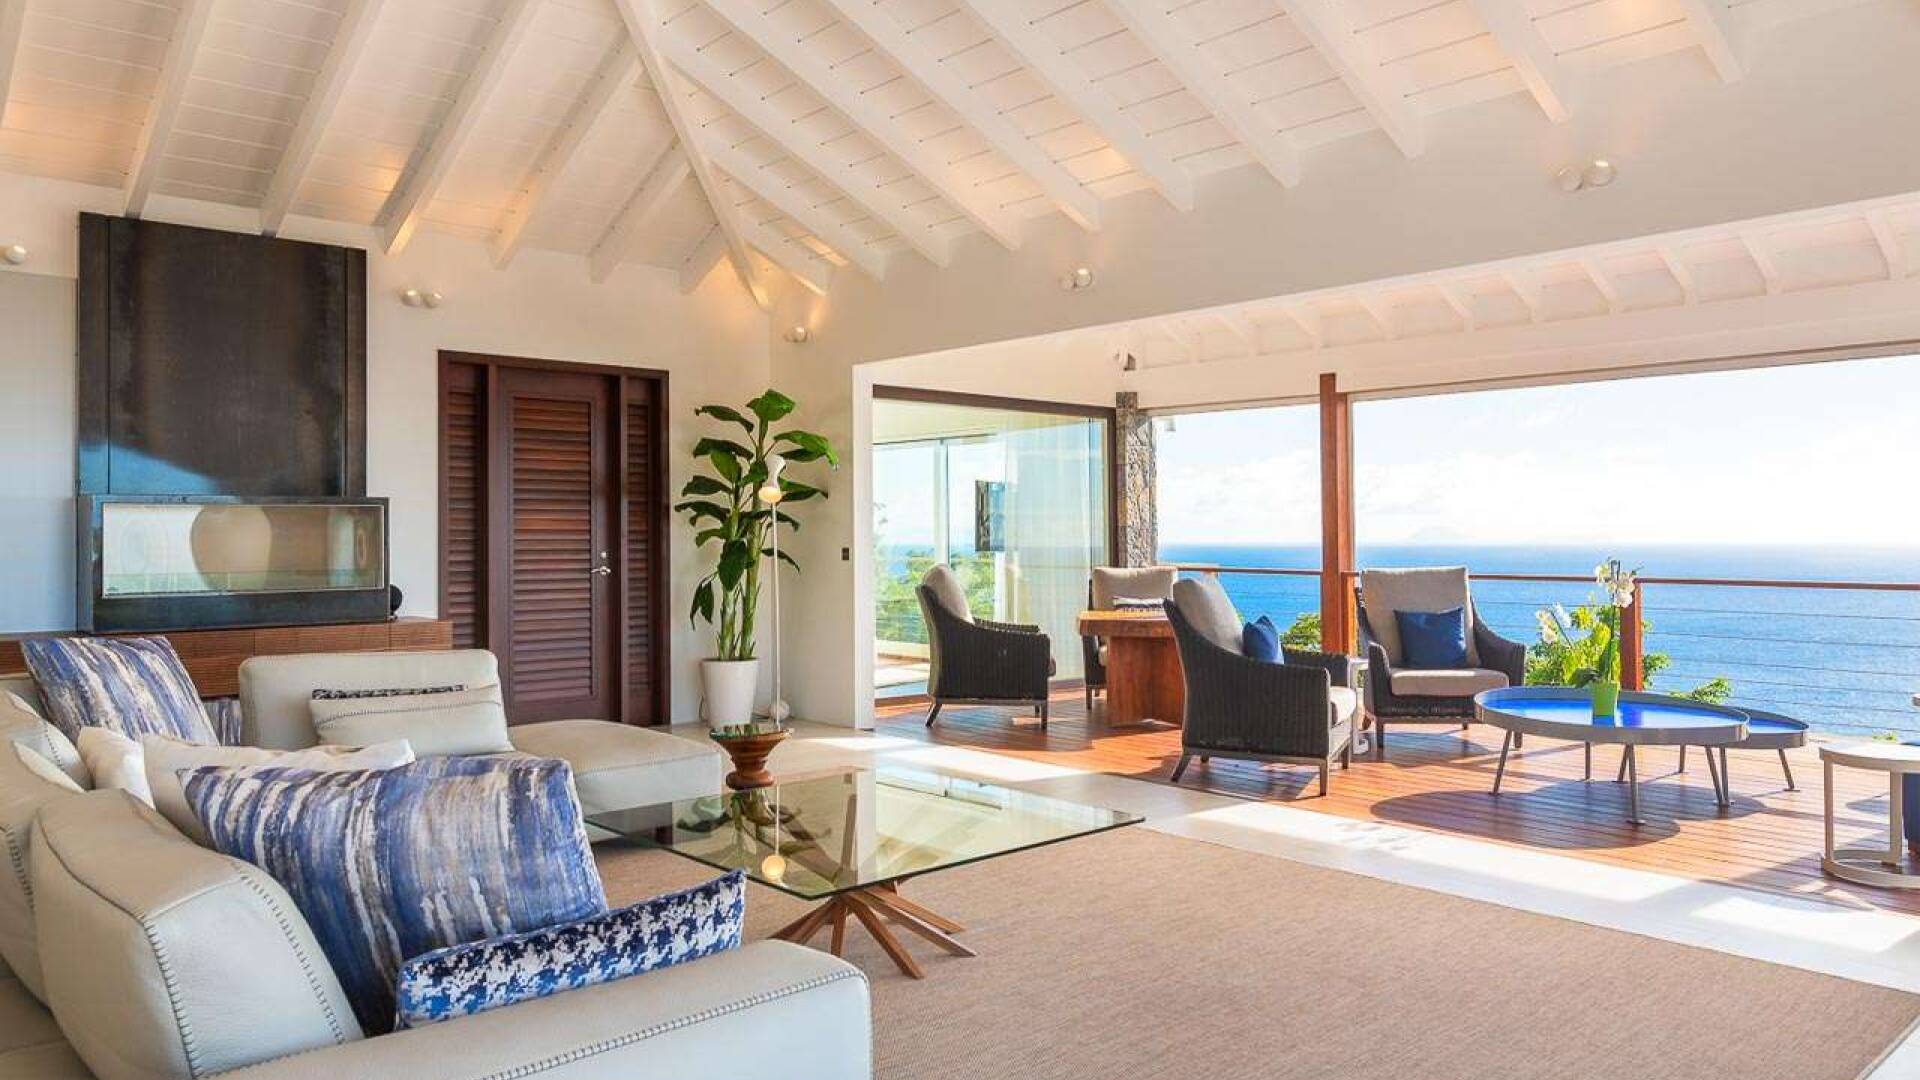 Living Room at WV MER, Gouverneur, St. Barthelemy